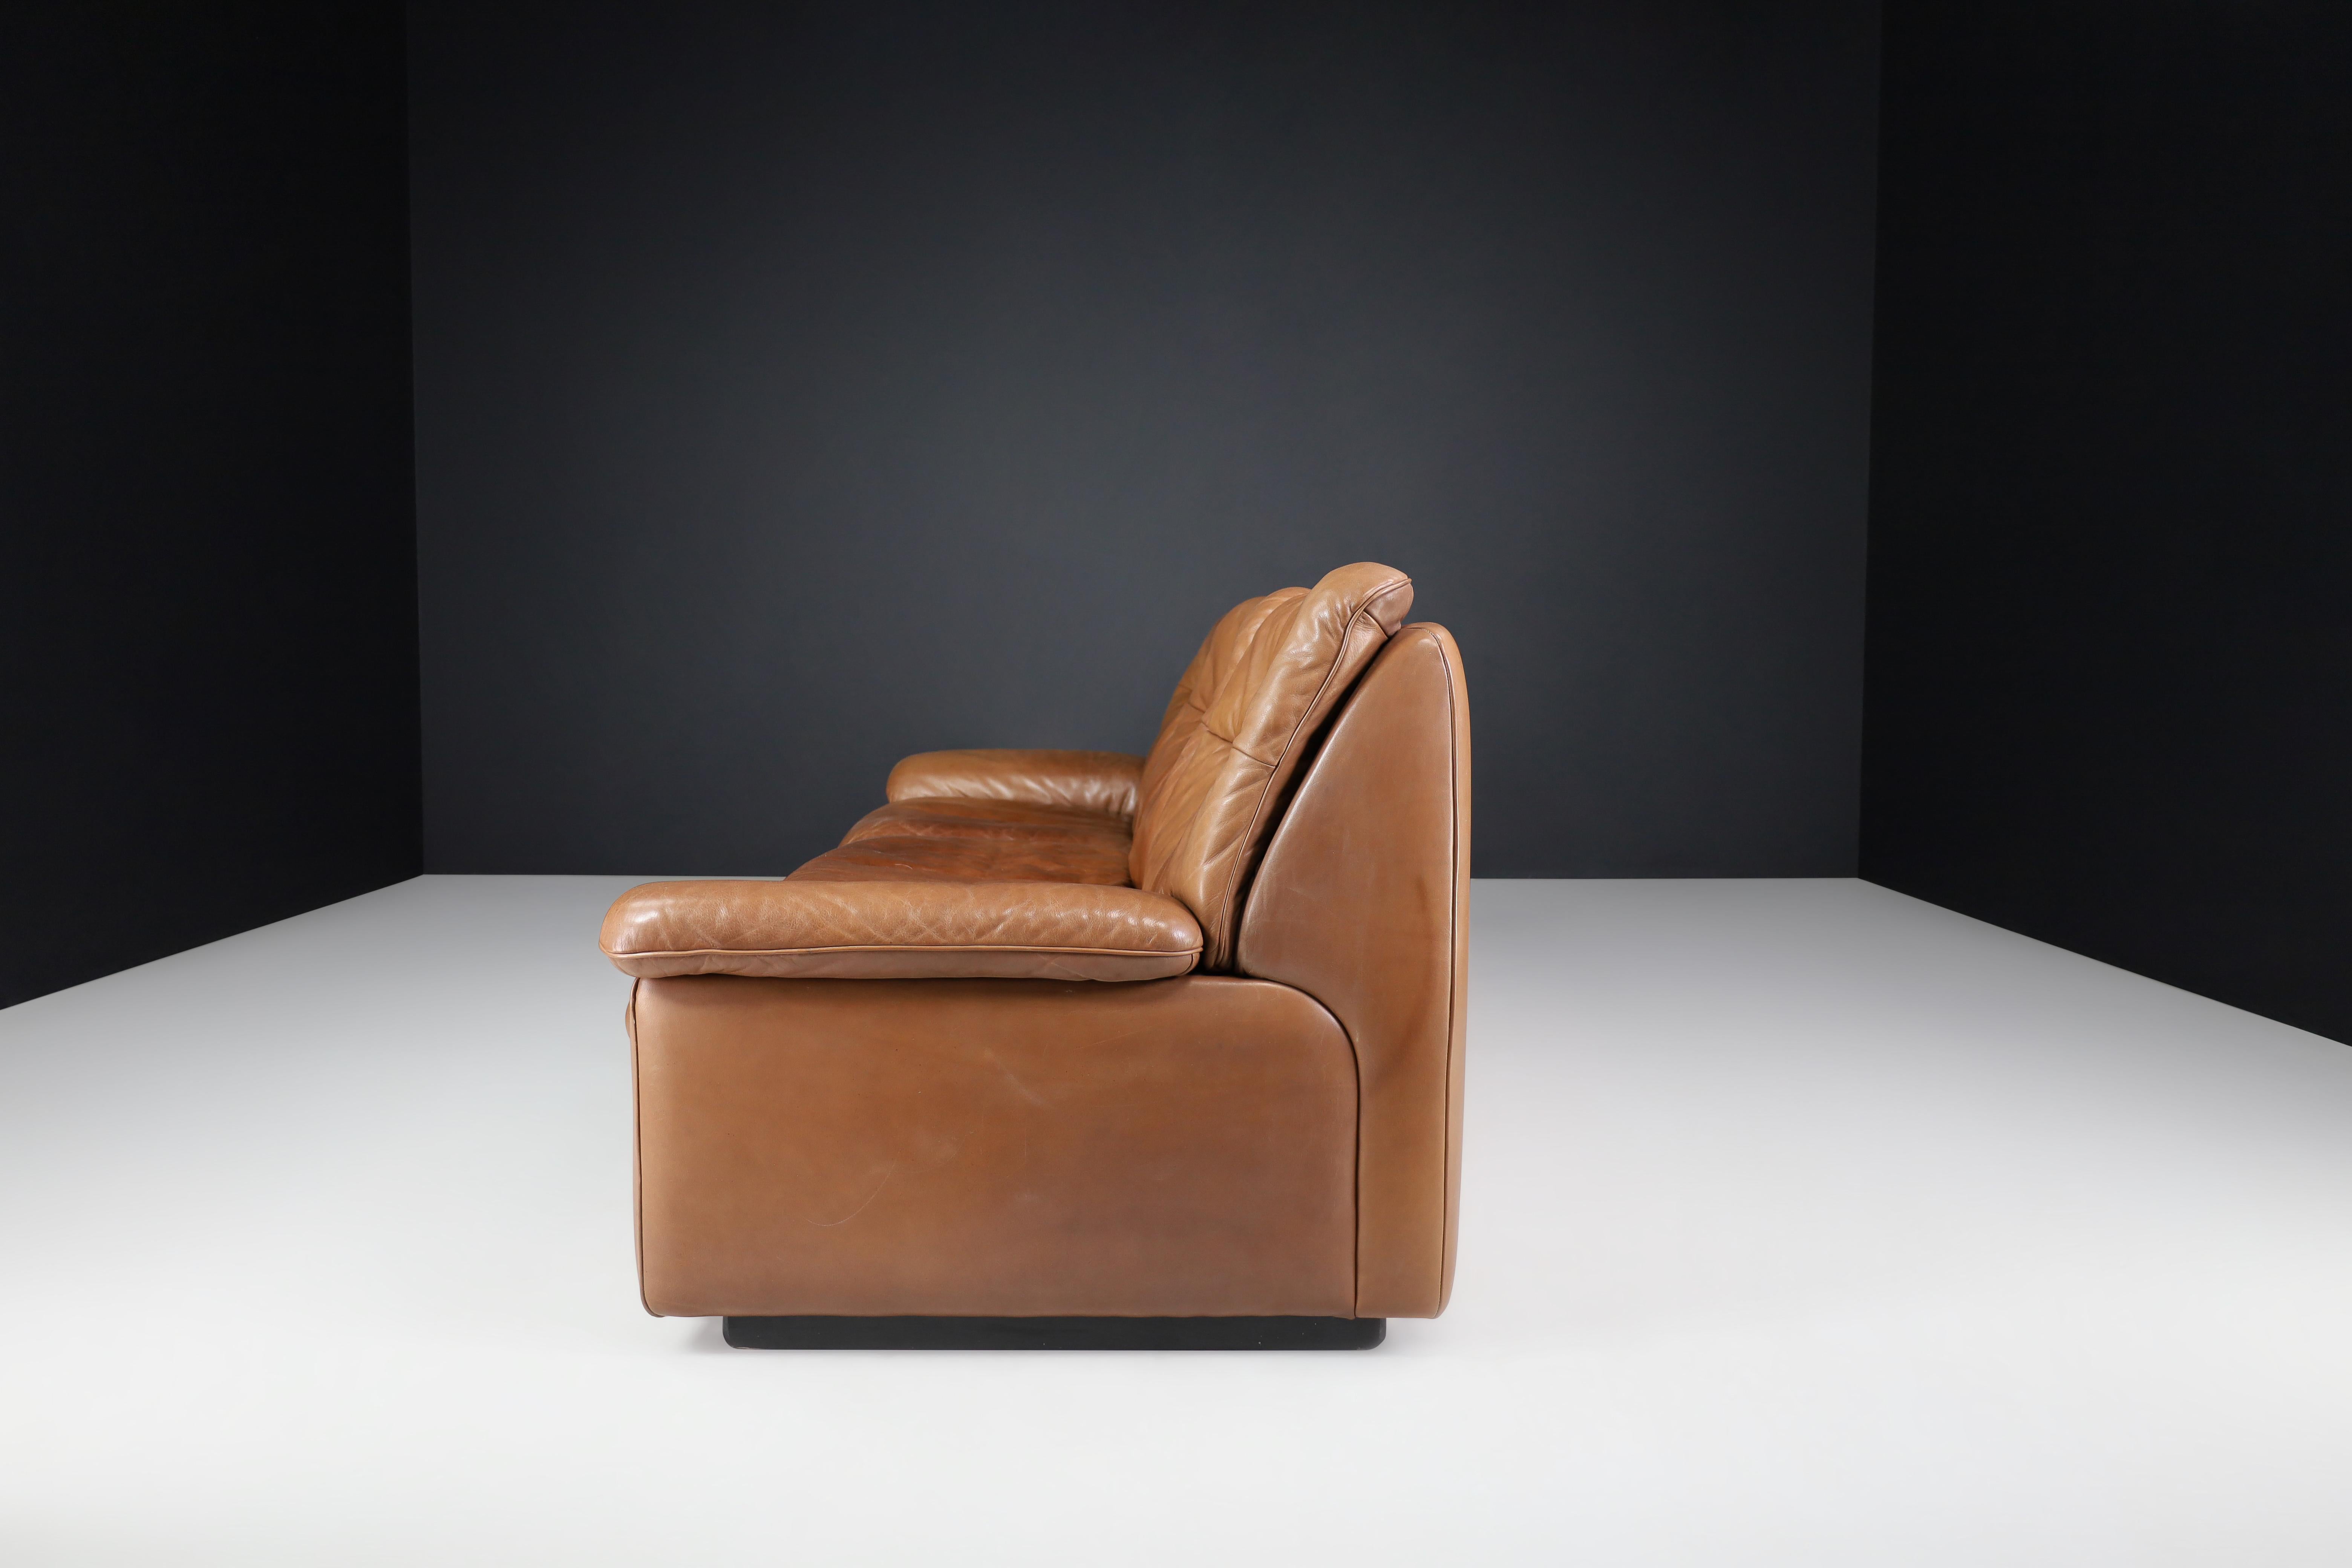 De Sede Ds 63 Three-Seater Sofa in Patinated Leather, Switzerland, 1970s For Sale 1